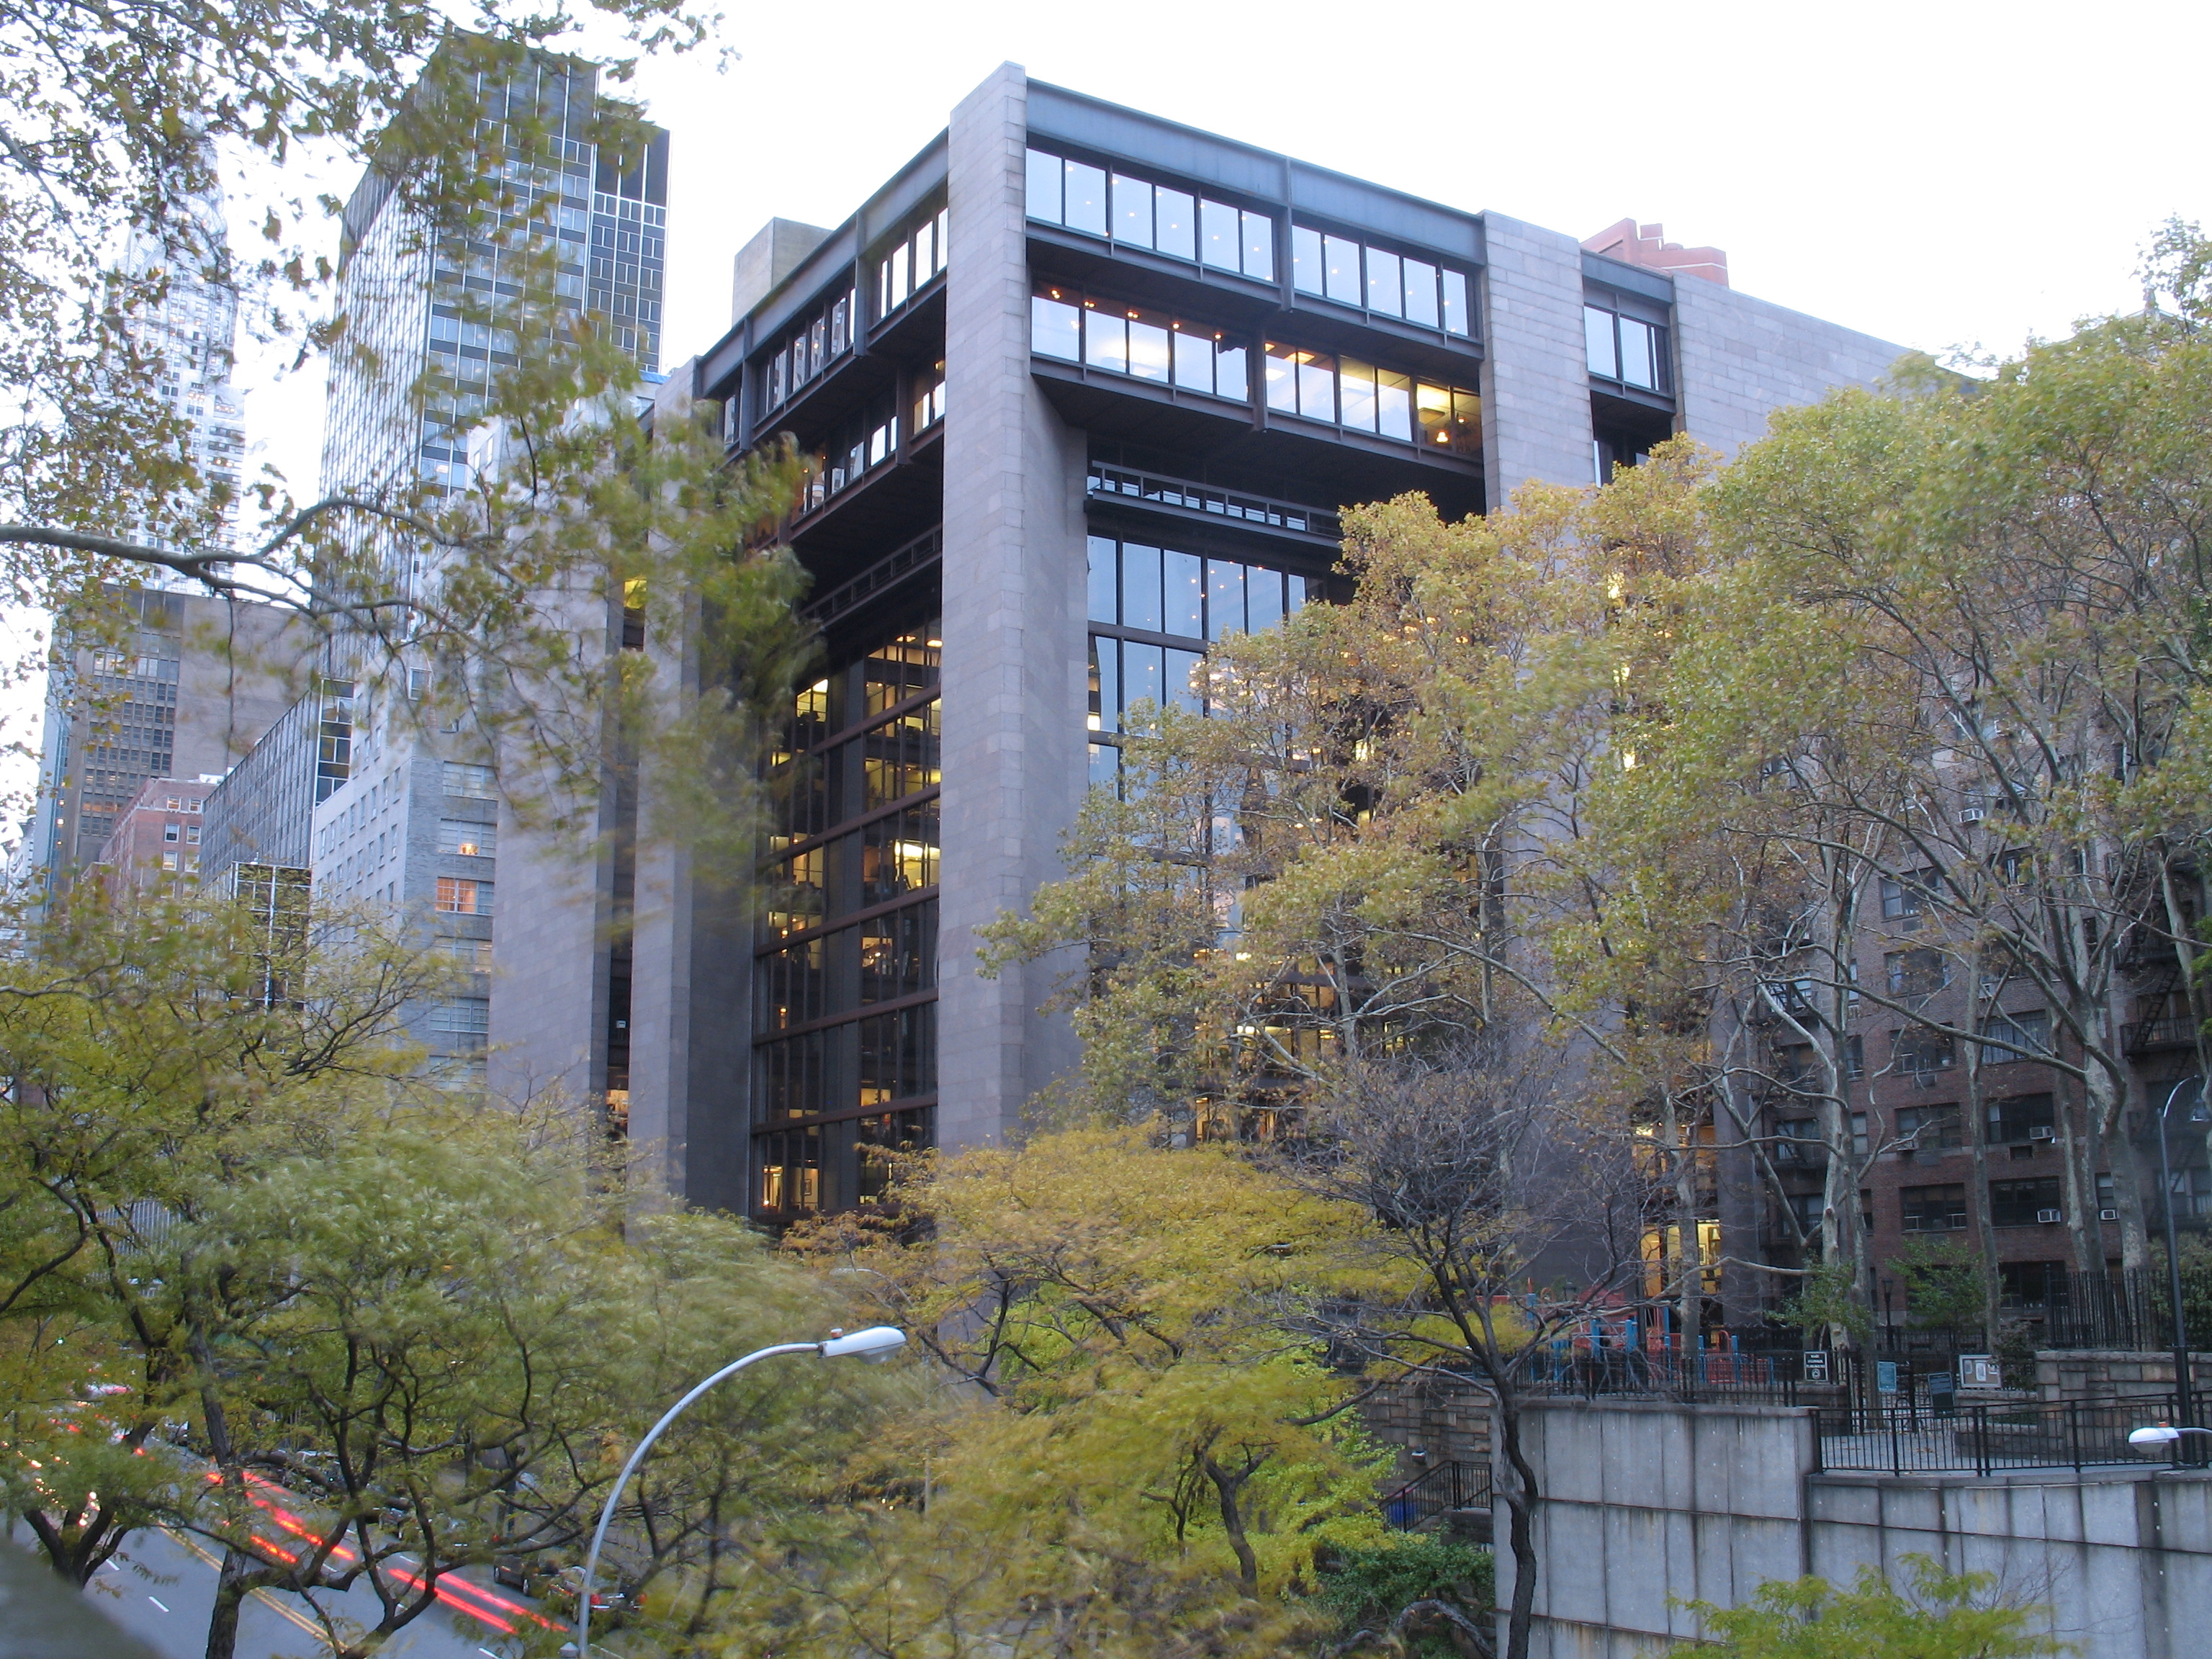 http://upload.wikimedia.org/wikipedia/commons/0/01/Ford_foundation_building_1.JPG